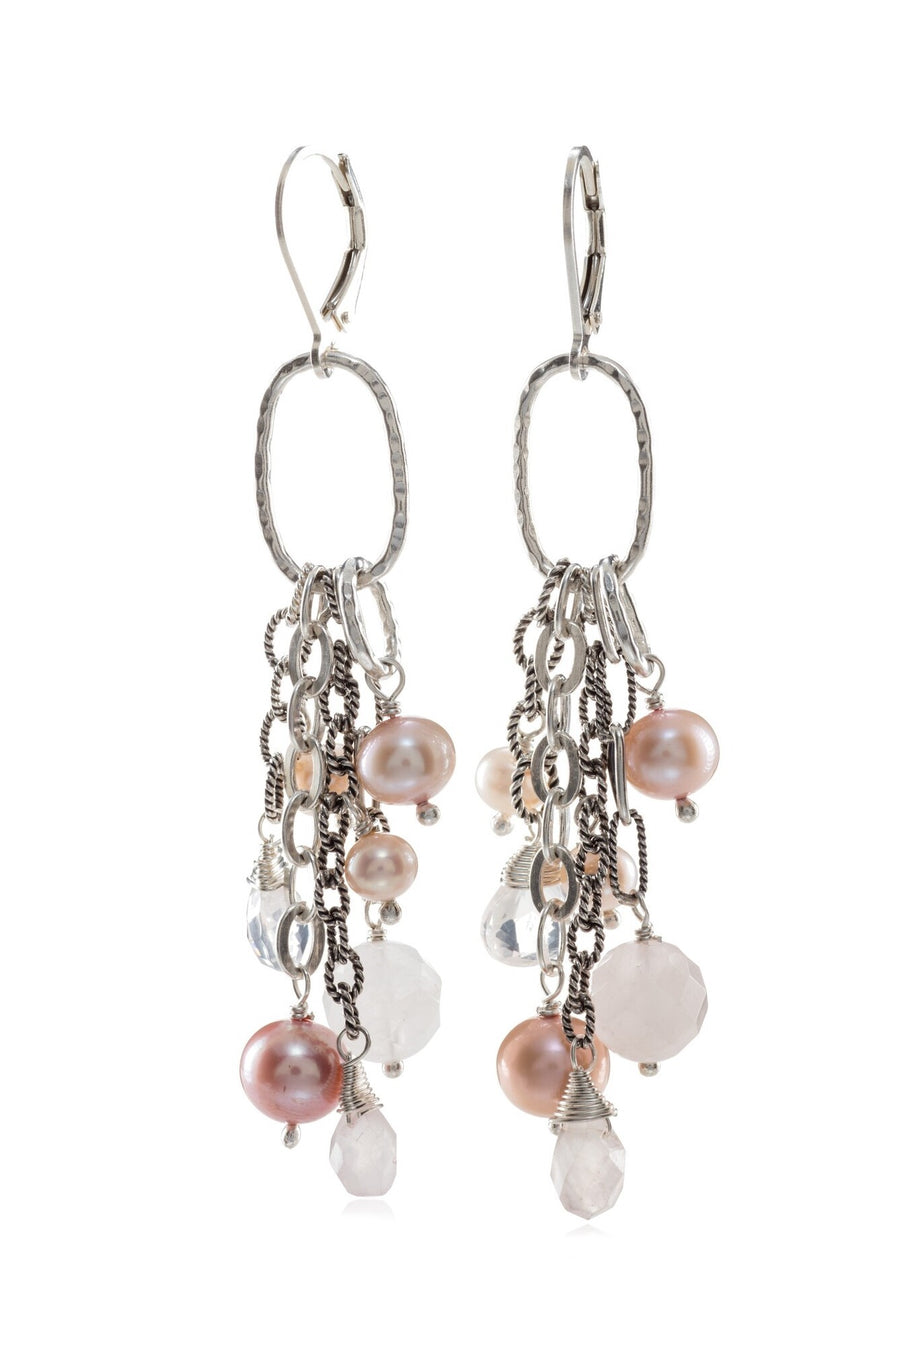 Sterling Silver Mixed Beads and Pearls Dangle Earrings (3917RQ)